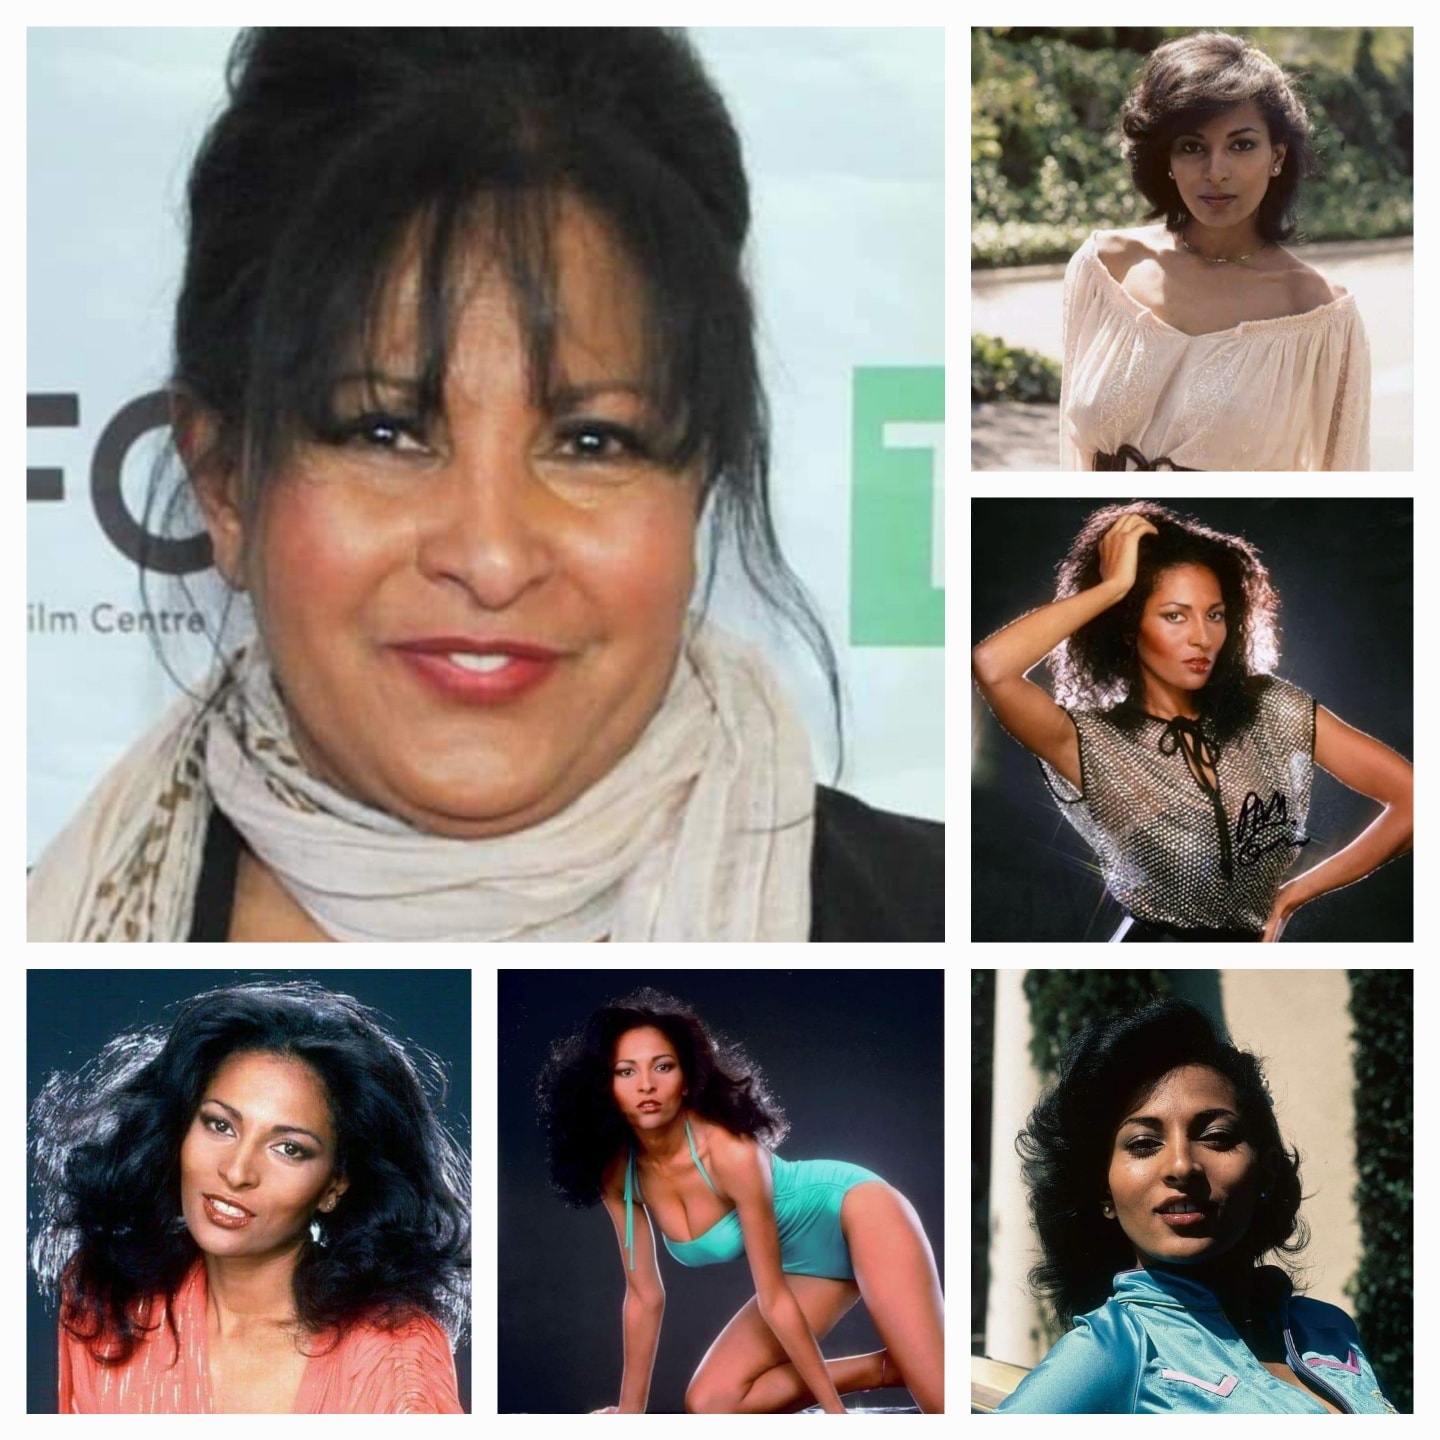 Happy Belated 73rd Birthday to Pam Grier!!! (May 26) 